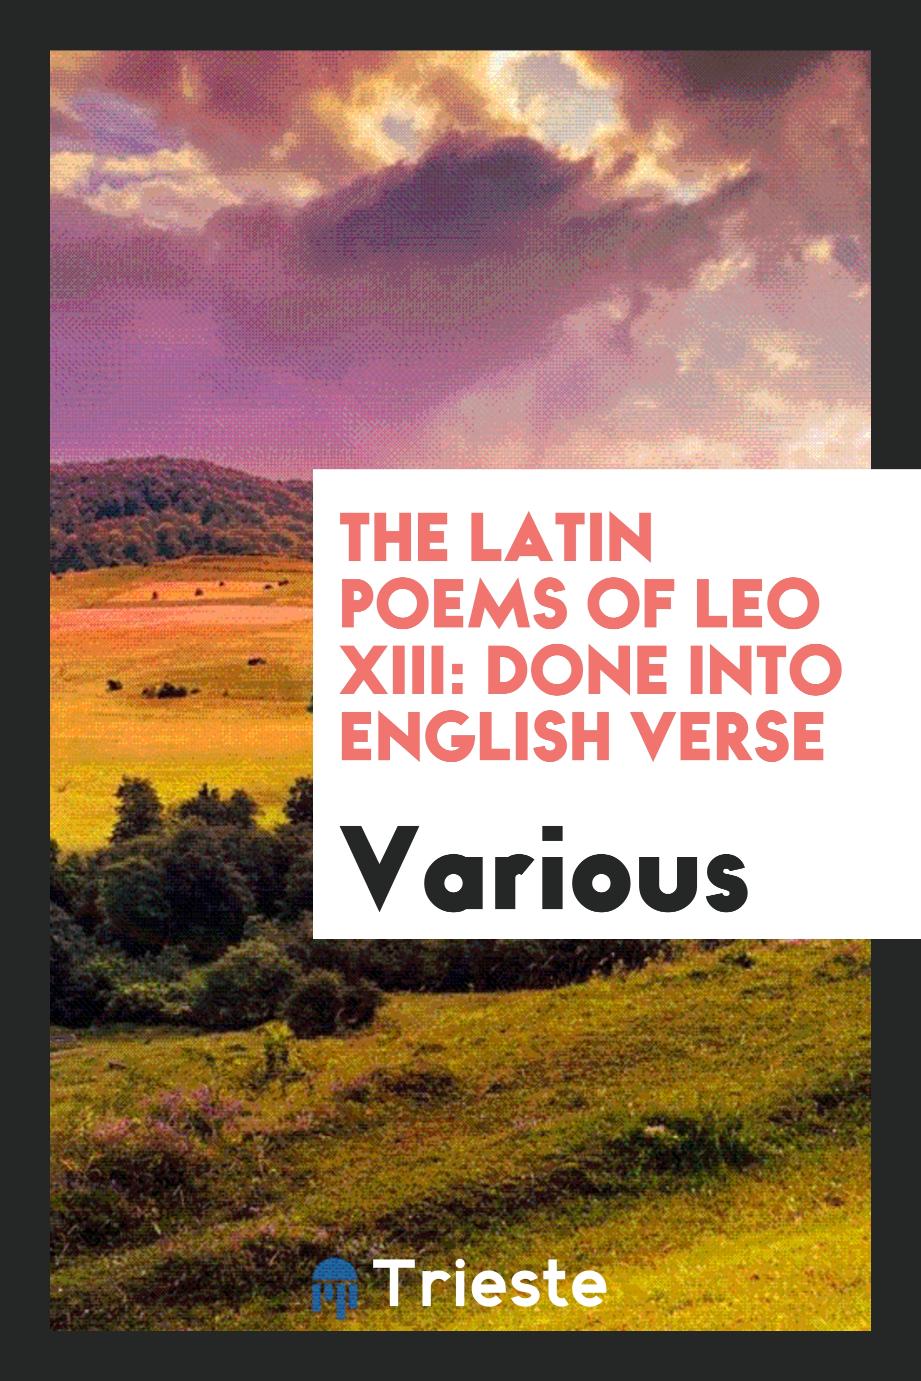 The Latin Poems of Leo XIII: Done Into English Verse